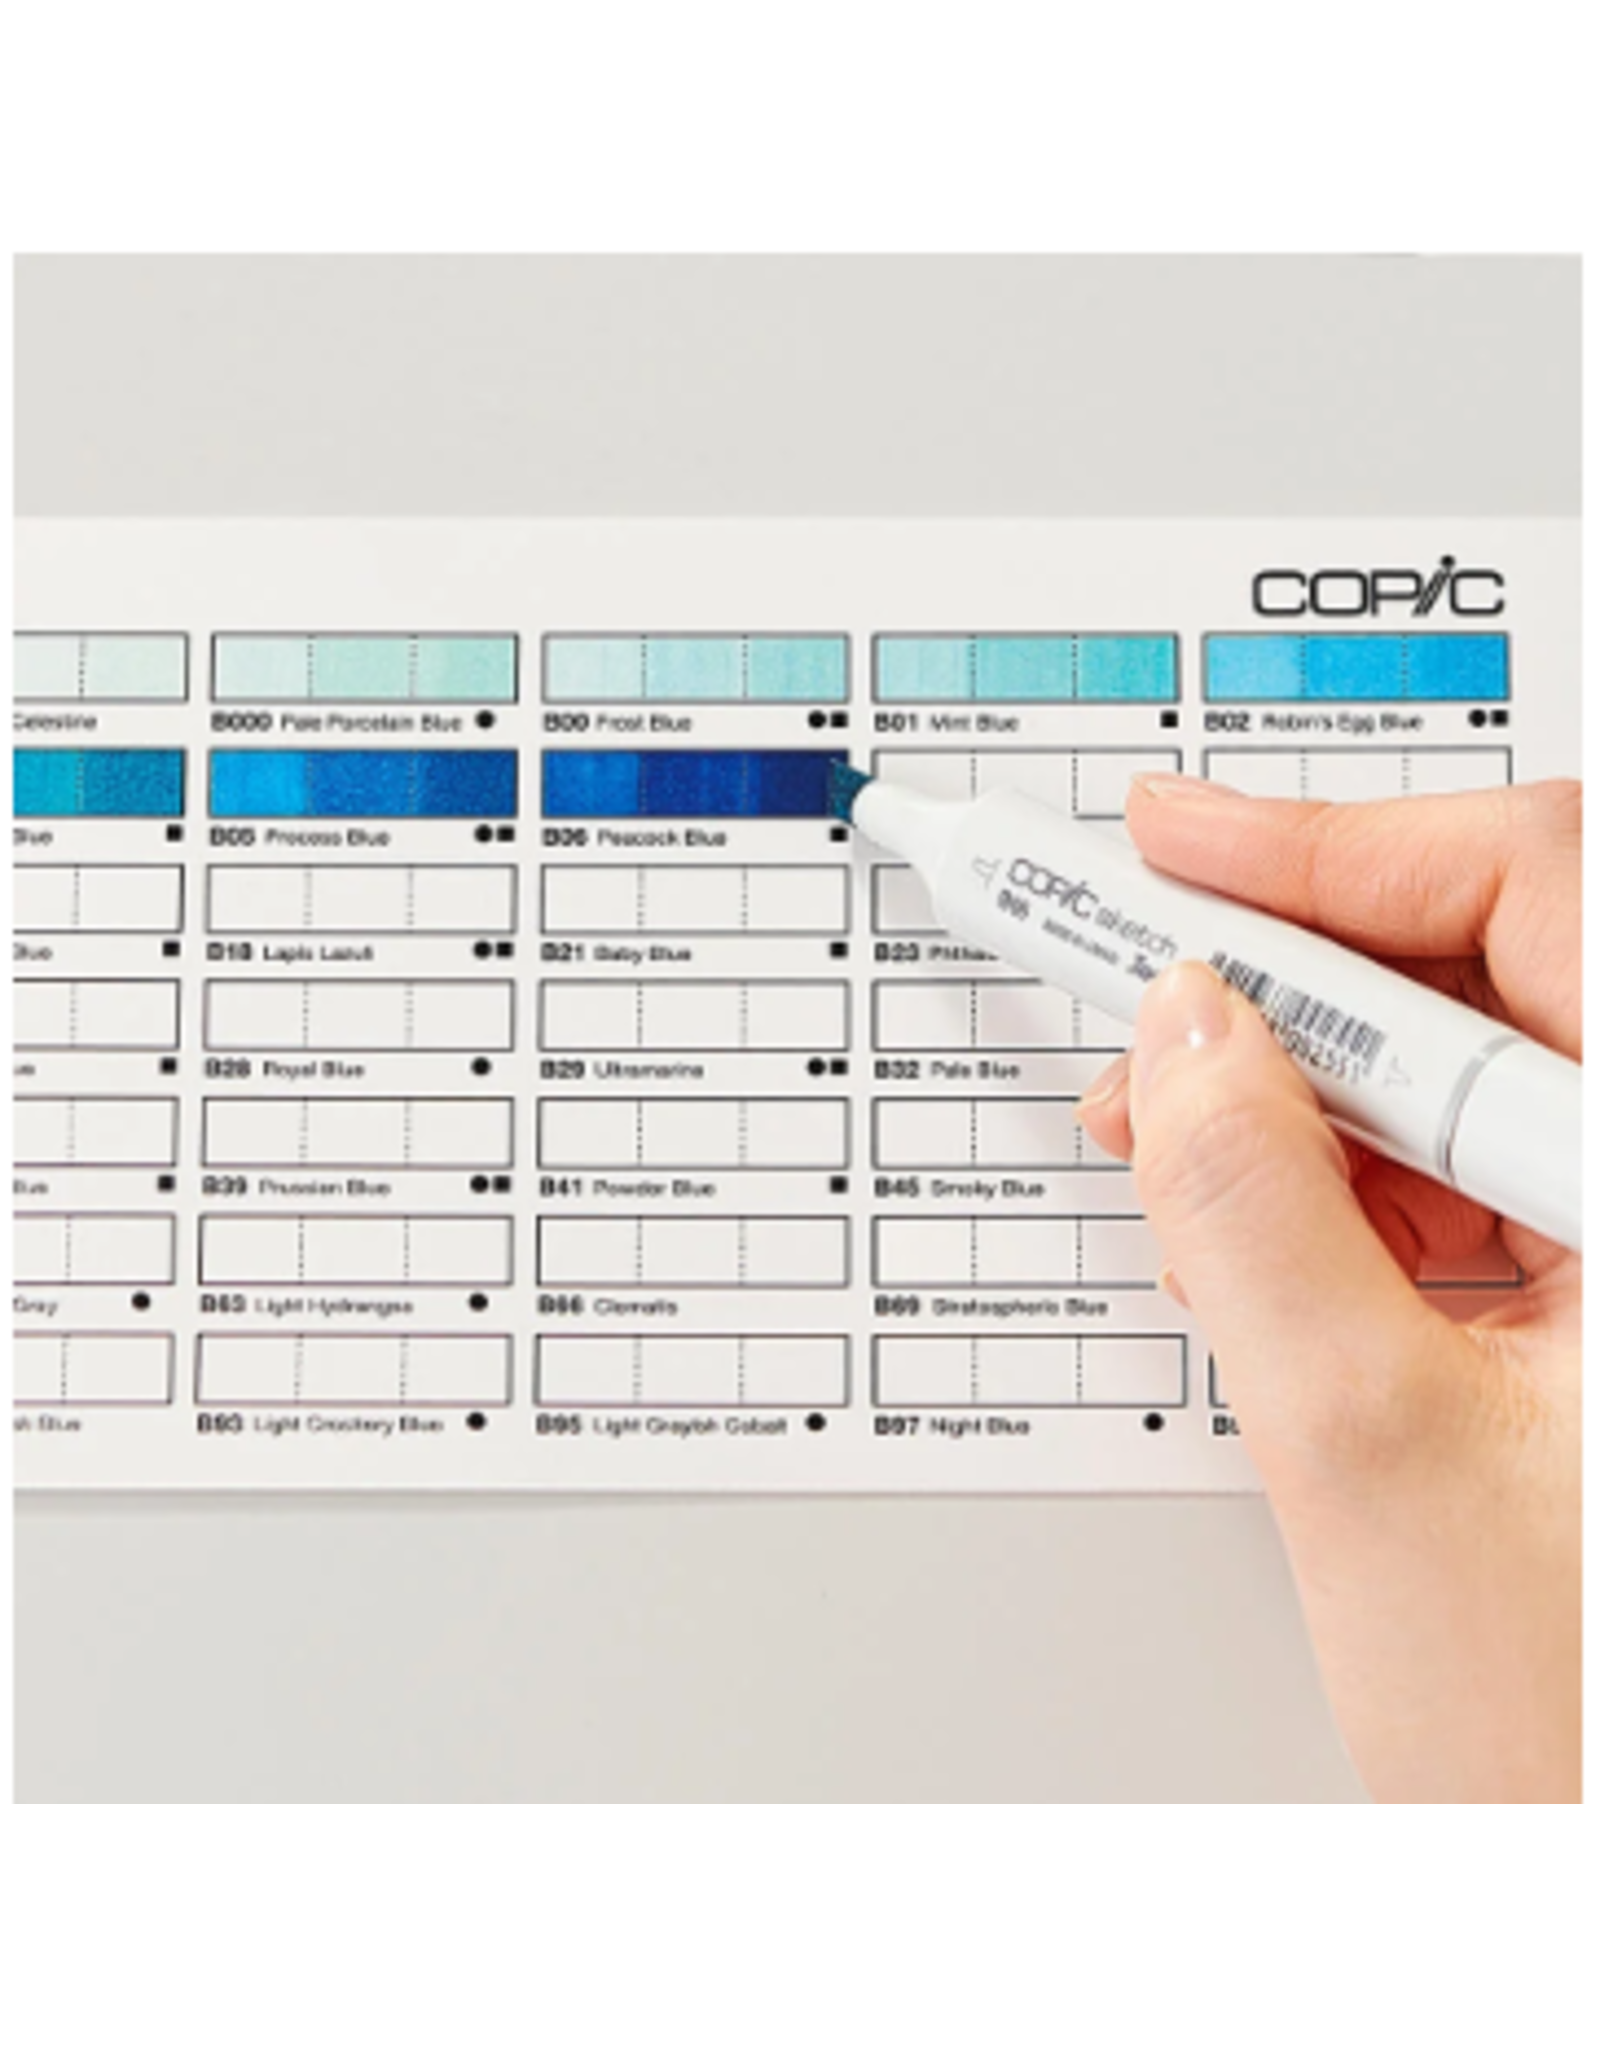 COPIC COPIC COLOR SWATCH CARDS